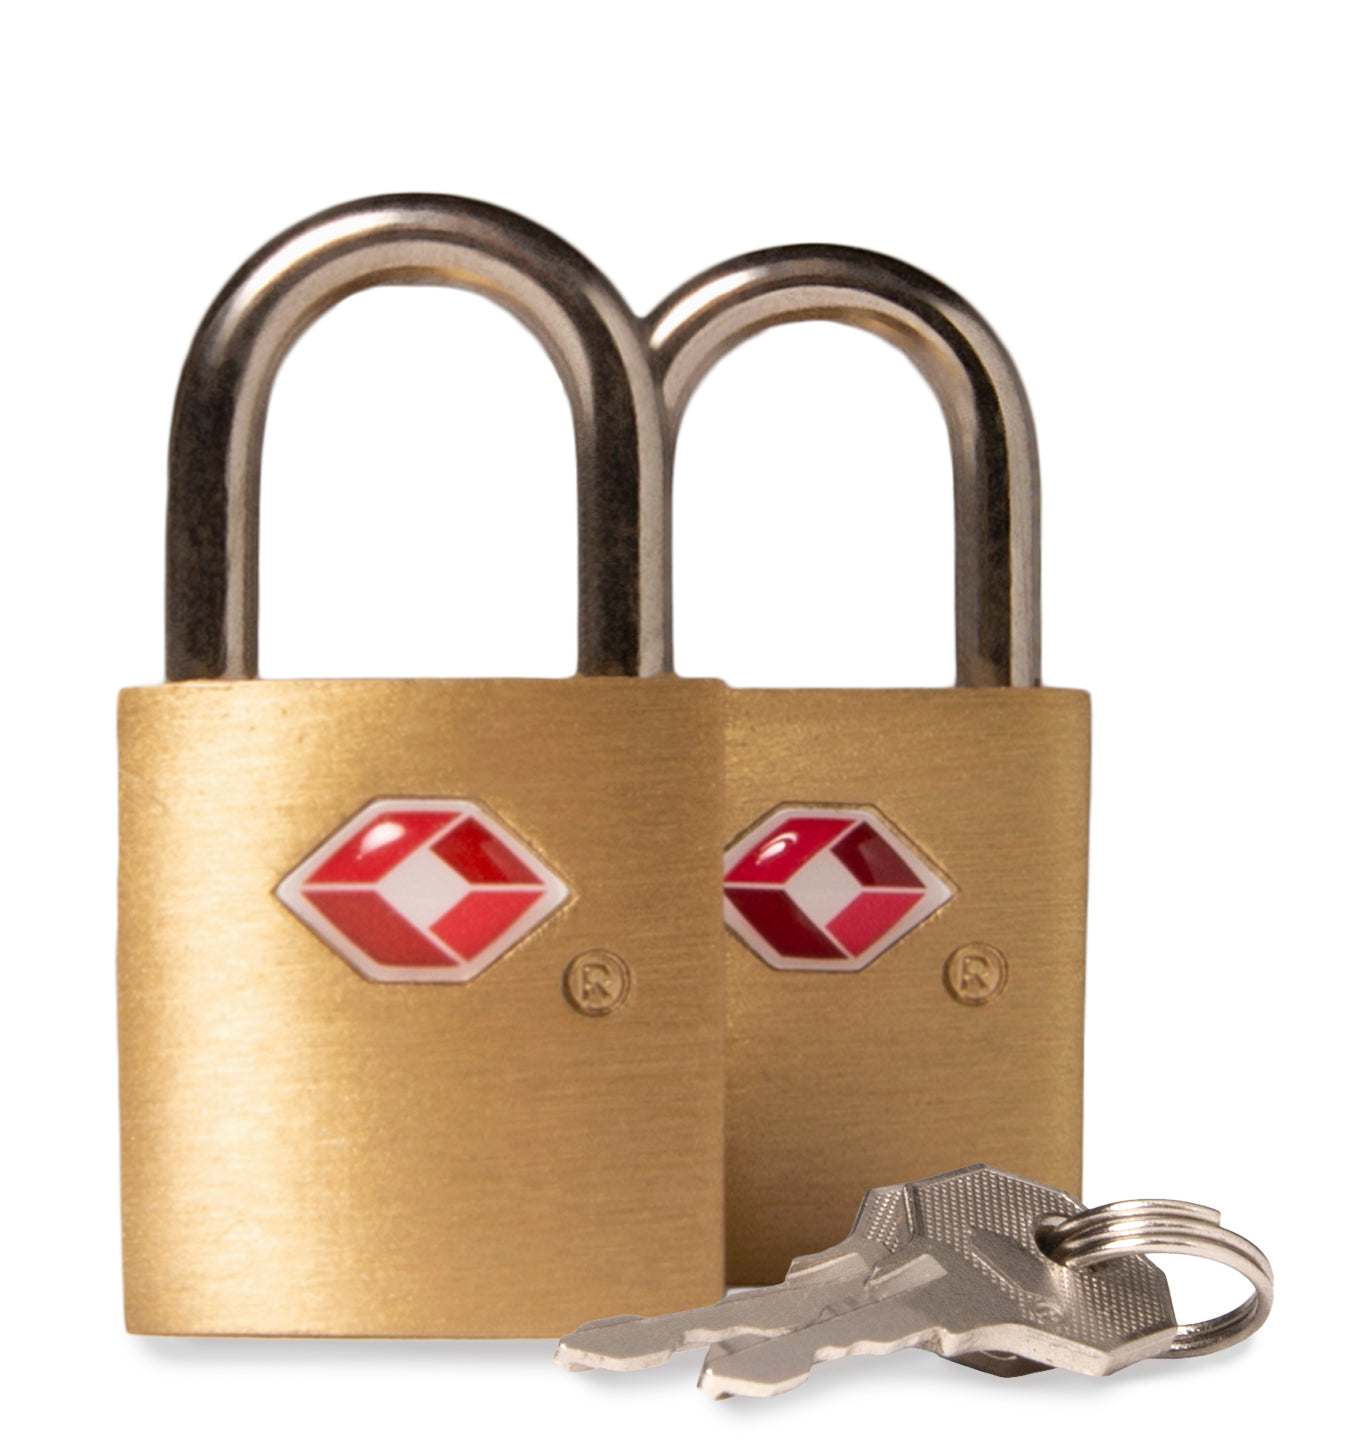 2 bronze-coloured locks and 2 silver metallic keys designed by tracker showing the TSA logo and brushed metal texture.